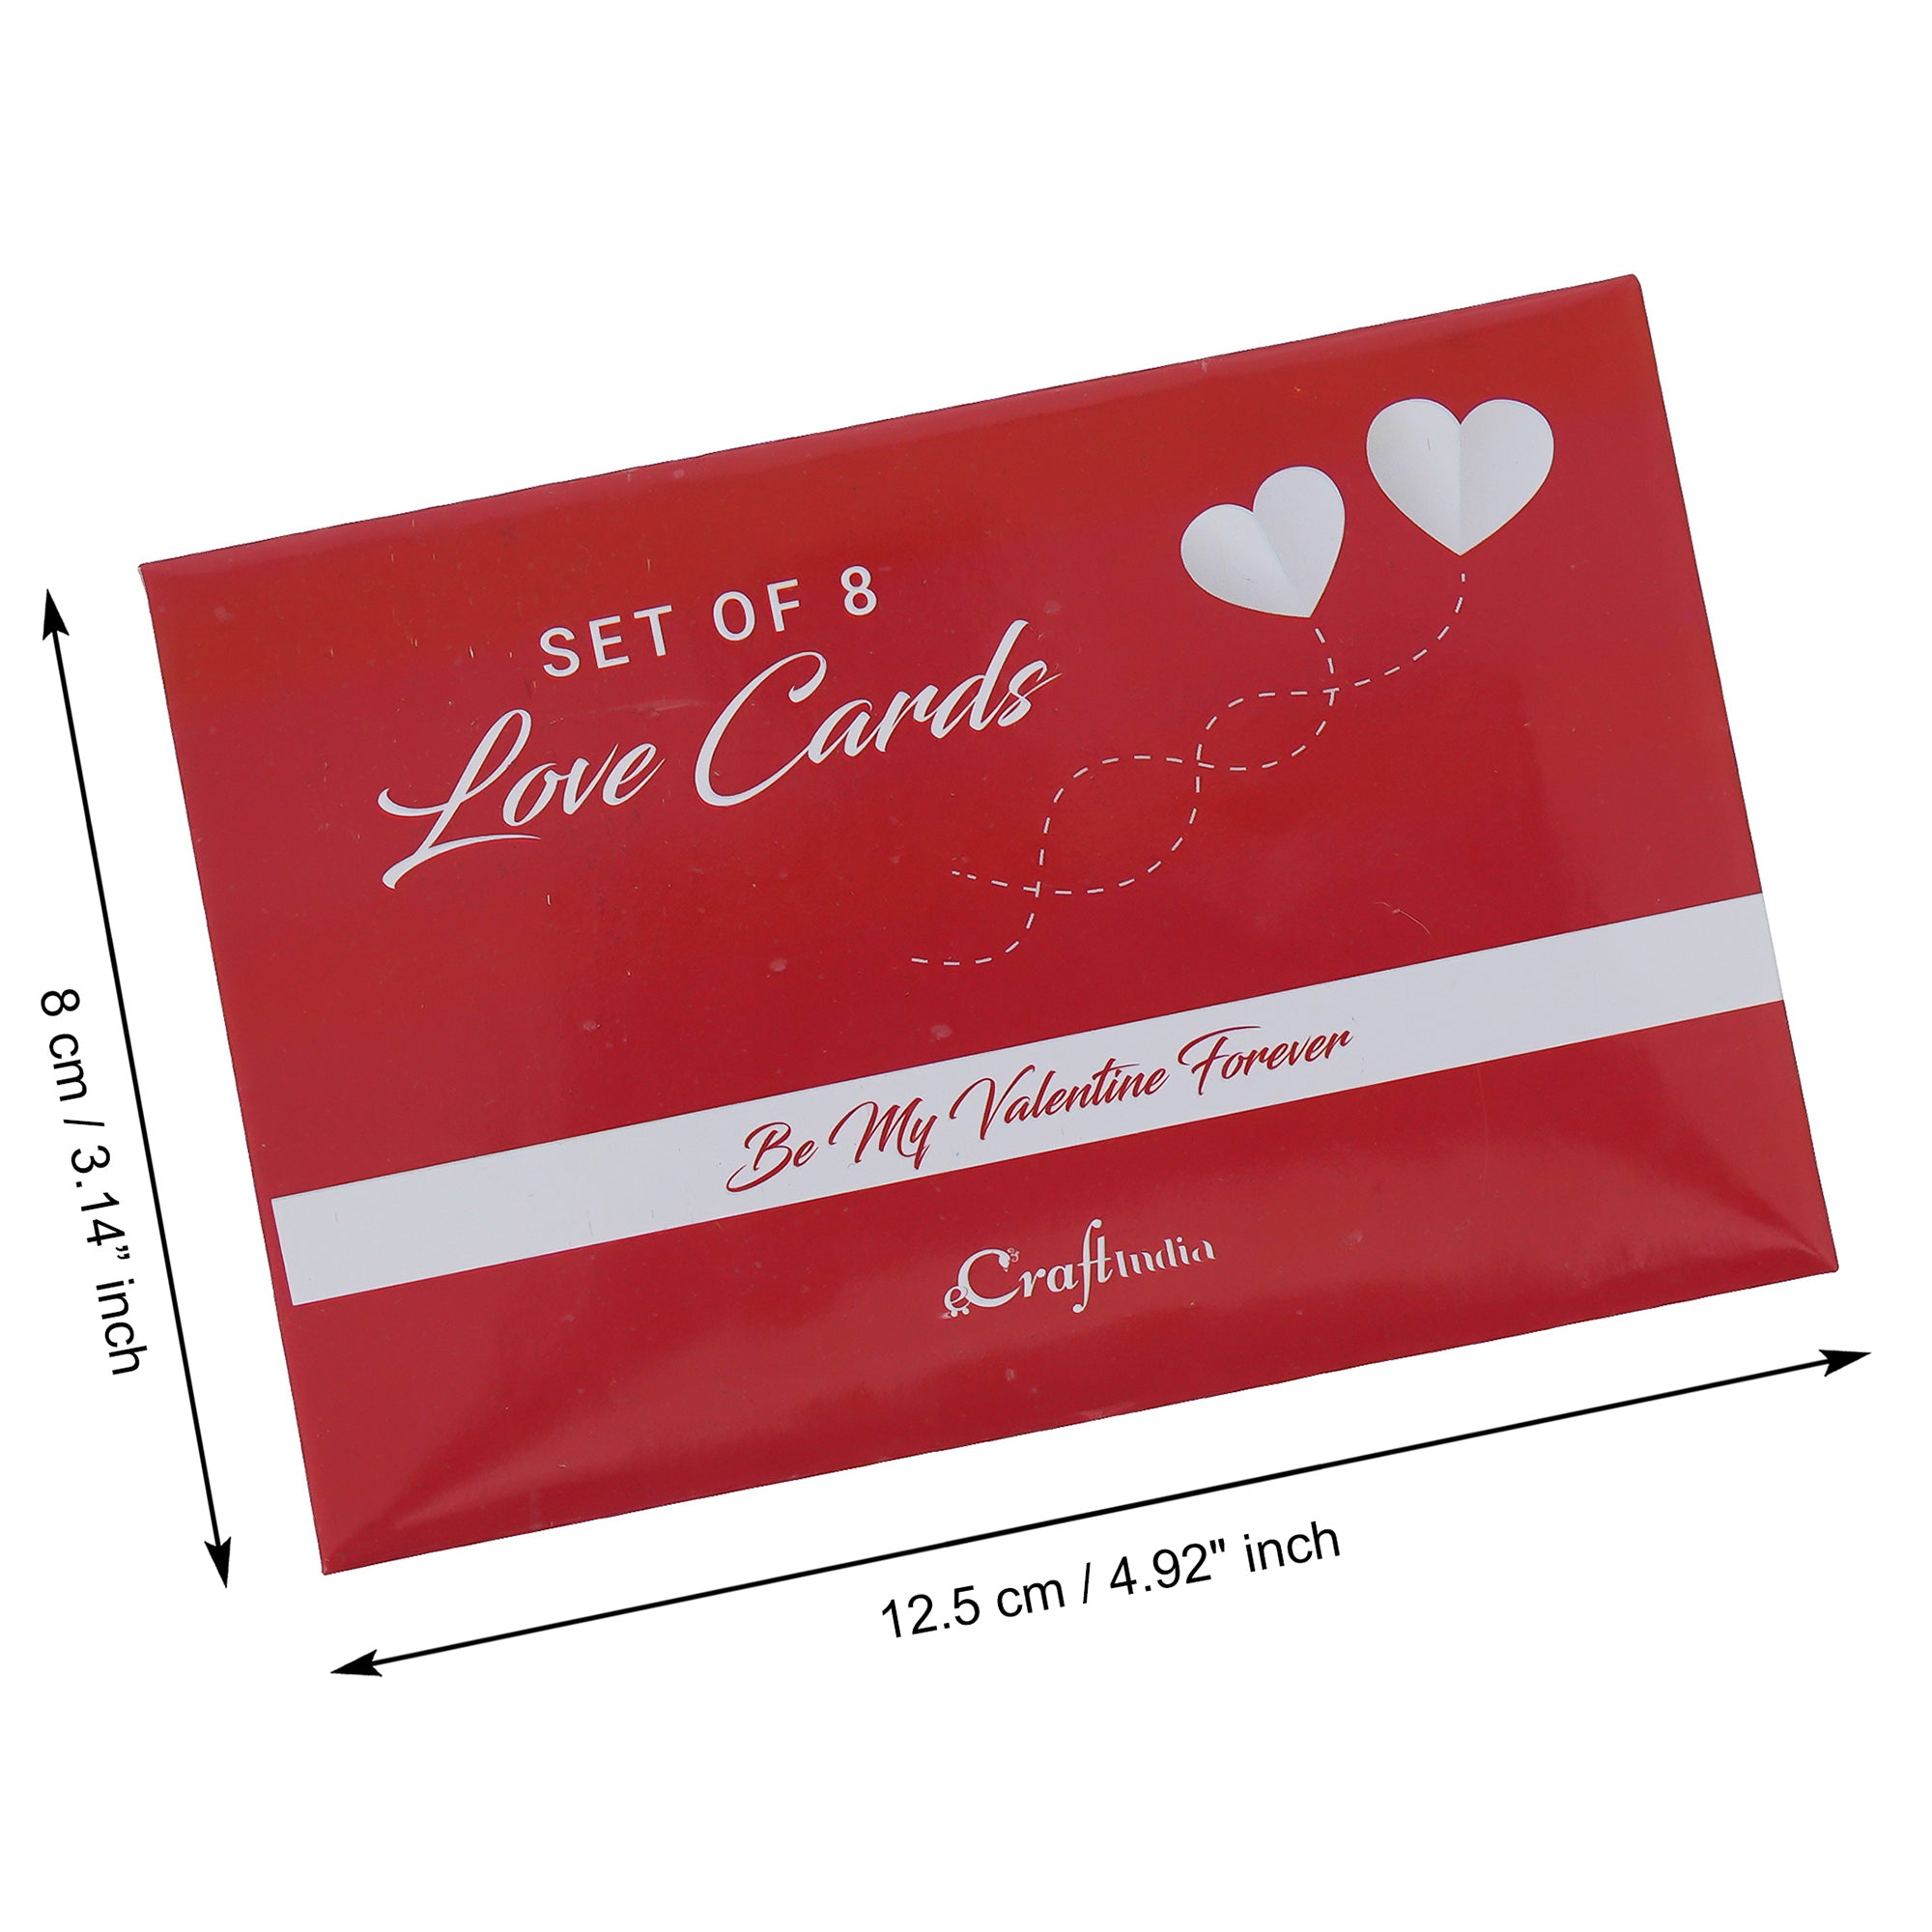 Valentine Combo of Set of 8 Love Post Cards Gift Cards Set, Red Gift Box with Teddy & Roses, "20 Reasons Why I Love You" Printed on Little Red Hearts Decorative Wooden Gift Set Box 2